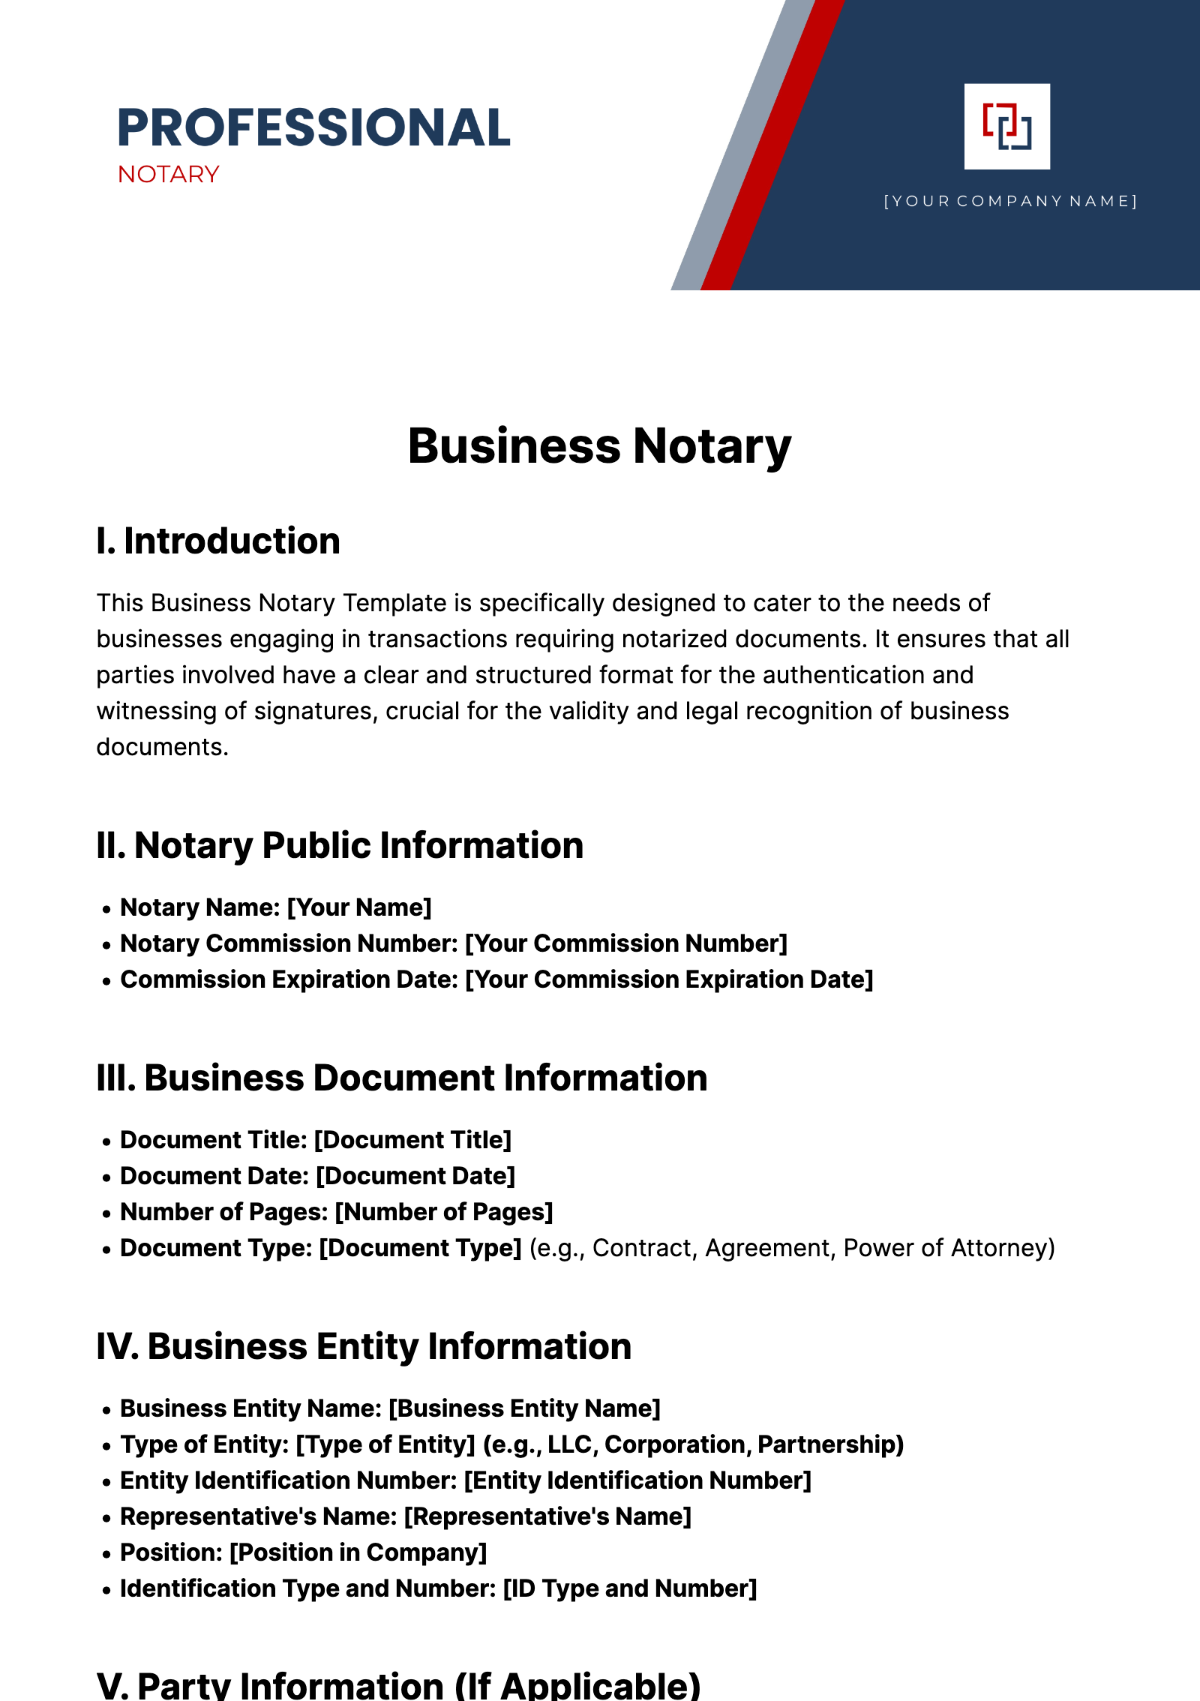 Business Notary Template